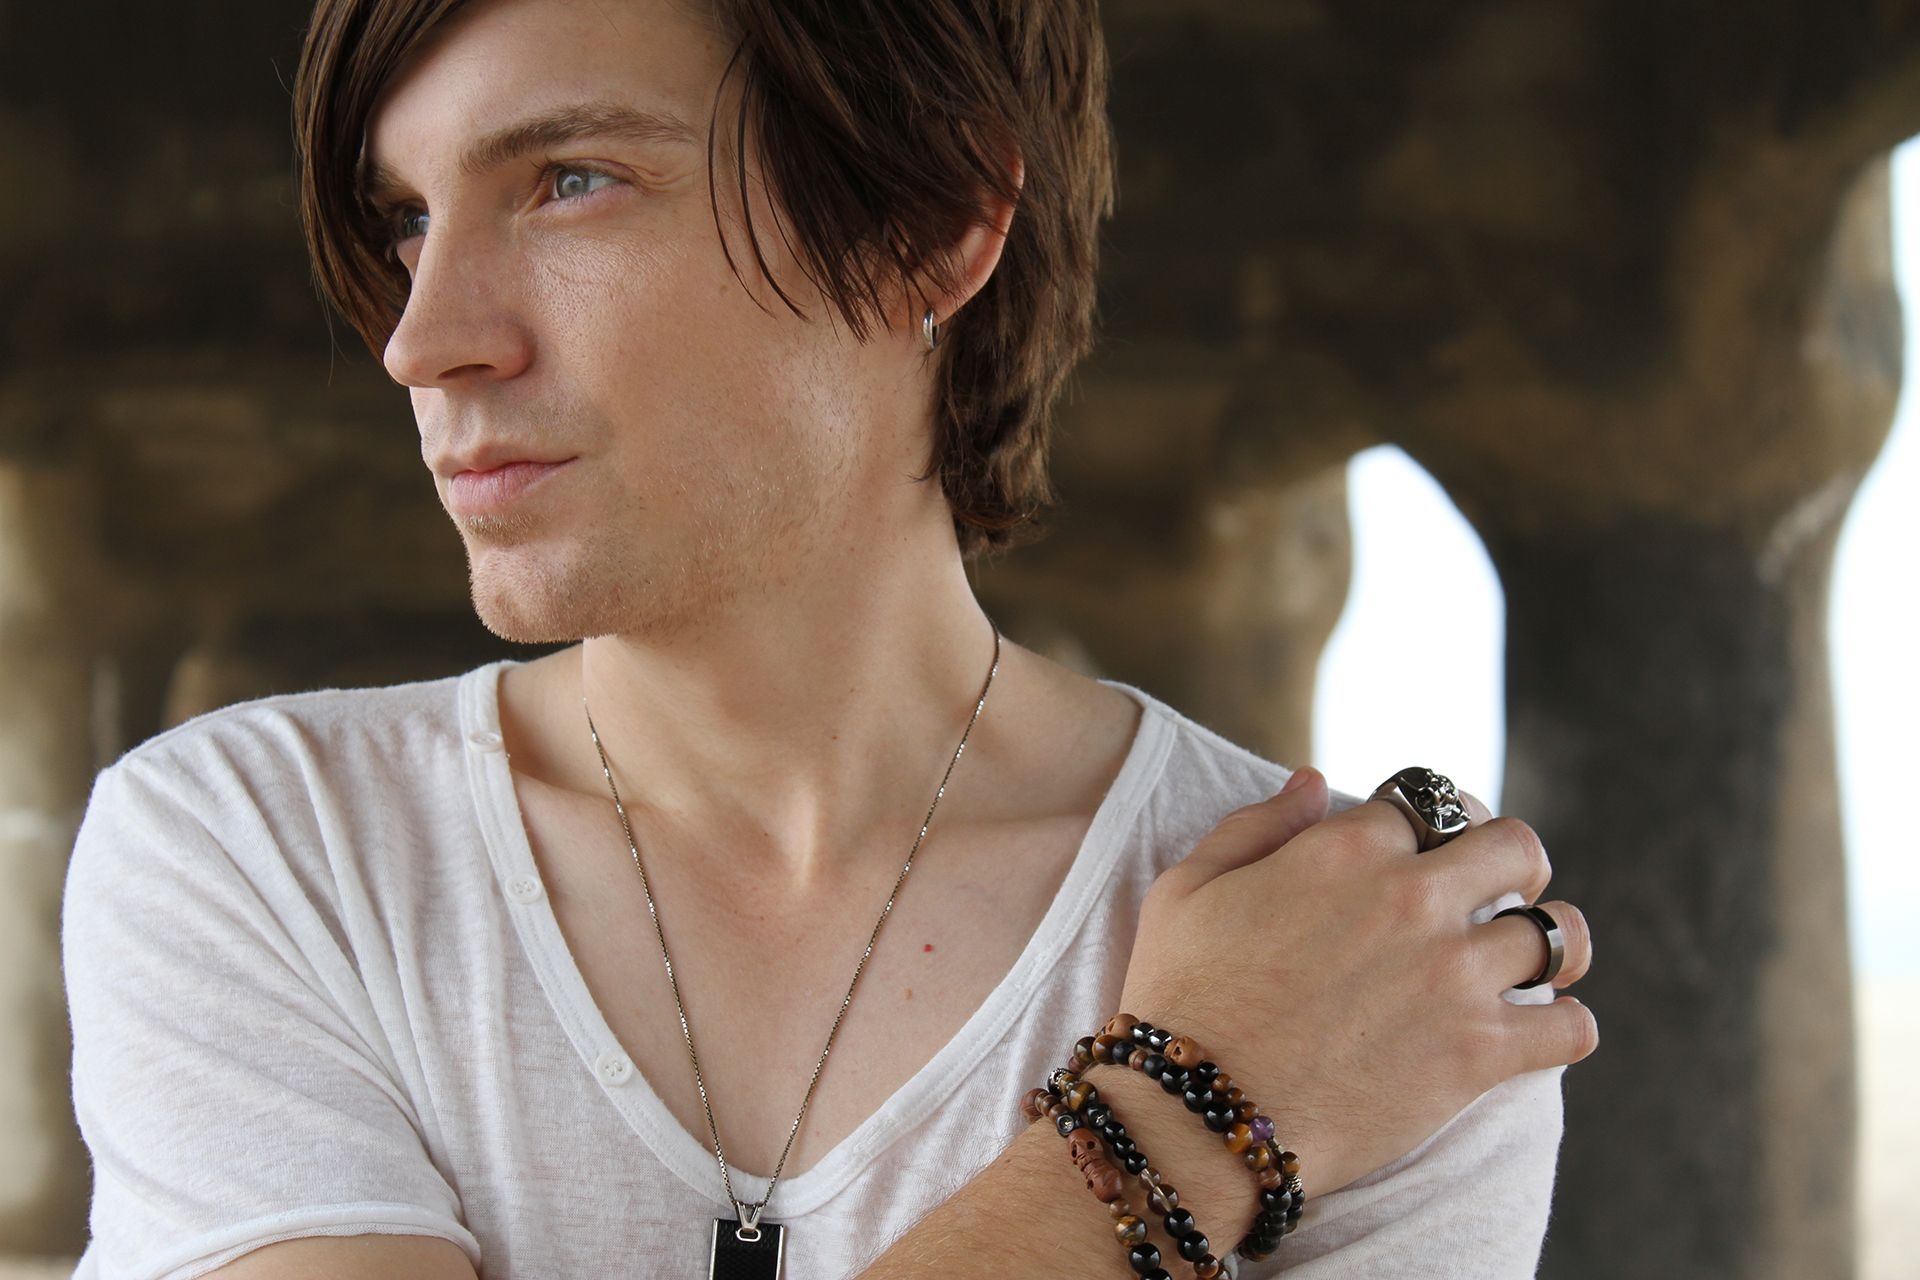 Alex Band, Cross necklace, Calling Band's pearl necklace, 1920x1280 HD Desktop